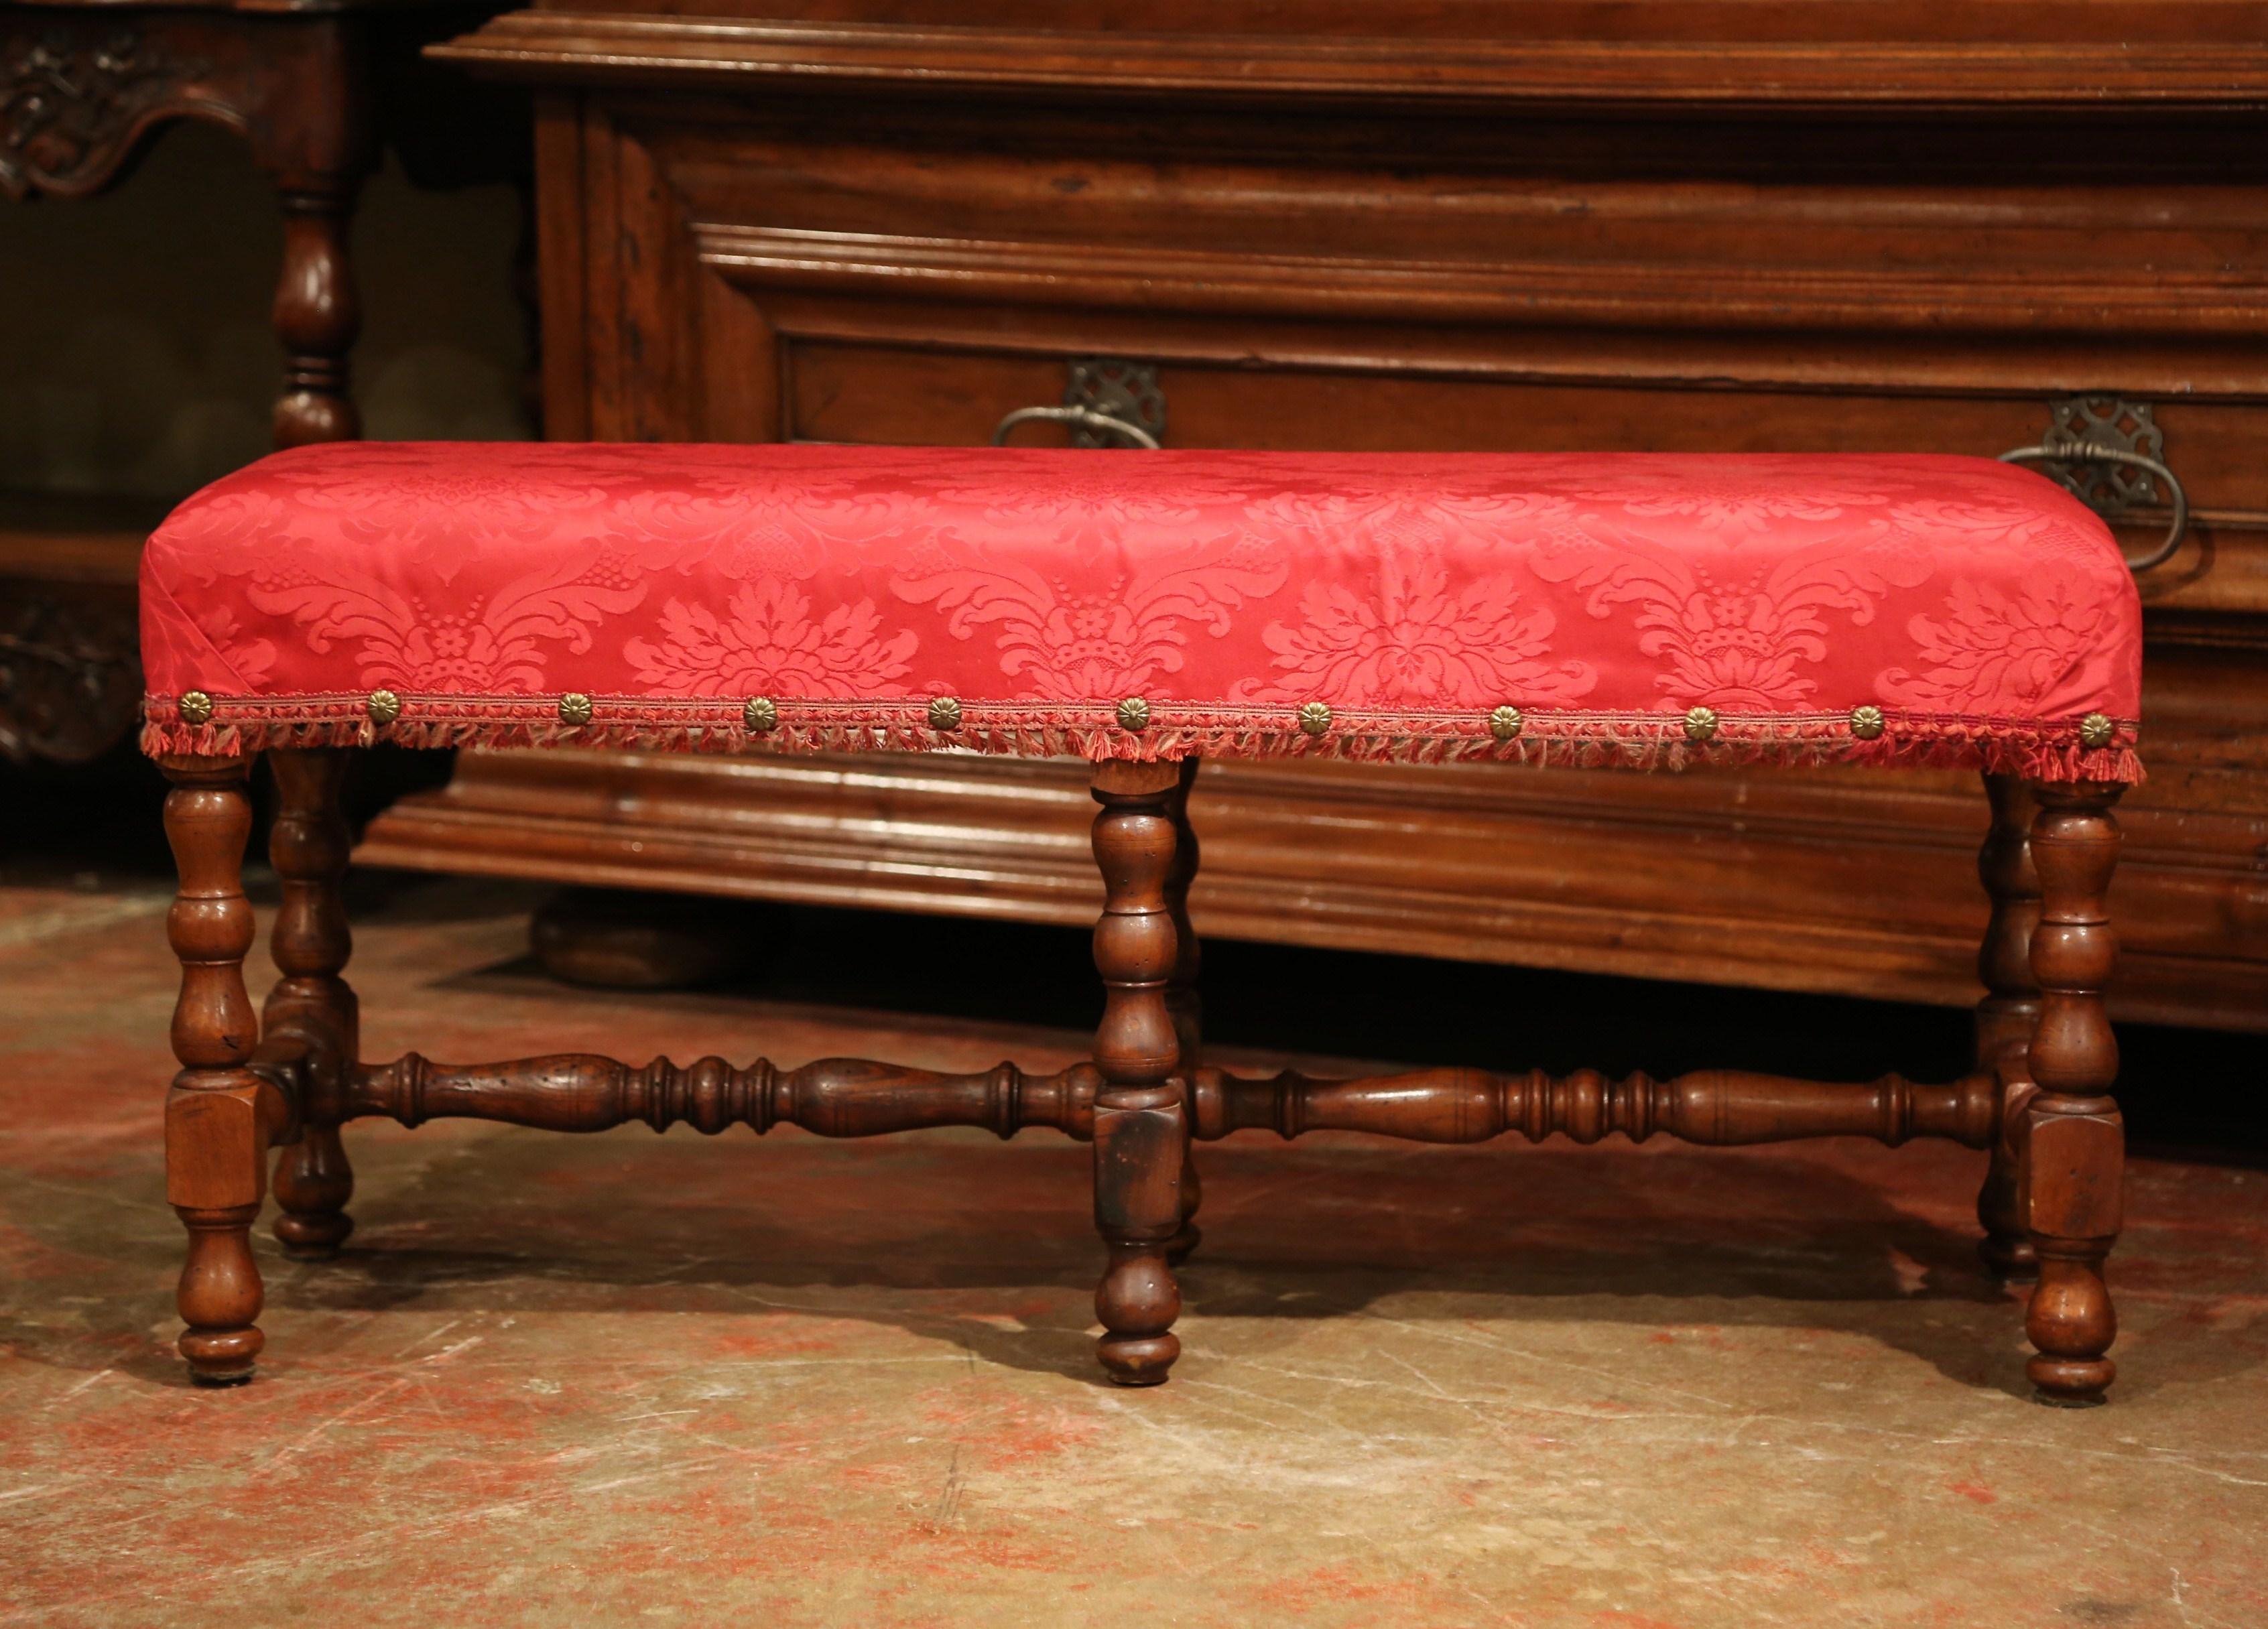 Add extra seating to a hallway, formal living room, or the foot of a queen sized bed with this elegant, antique bench. Crafted in France circa 1860, this fruit wood piece features four delicately carved, turned legs with a matching stretcher. The